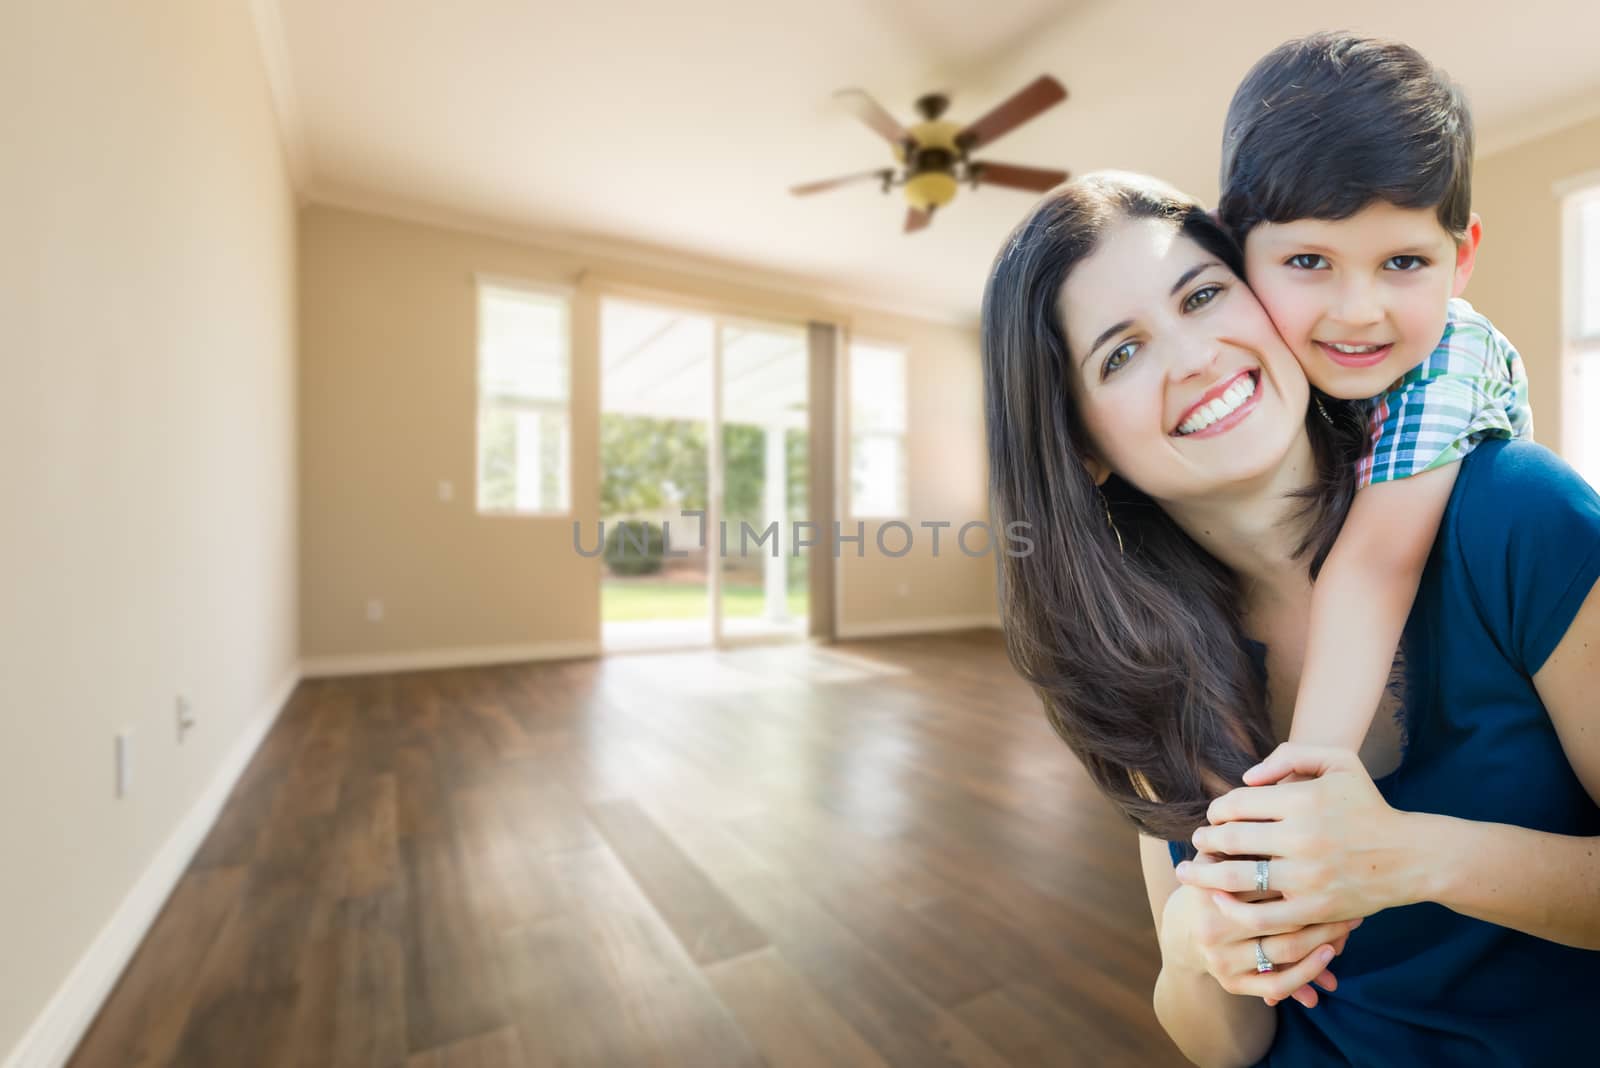 Young Mother and Son Inside Empty Room with Wood Floors.